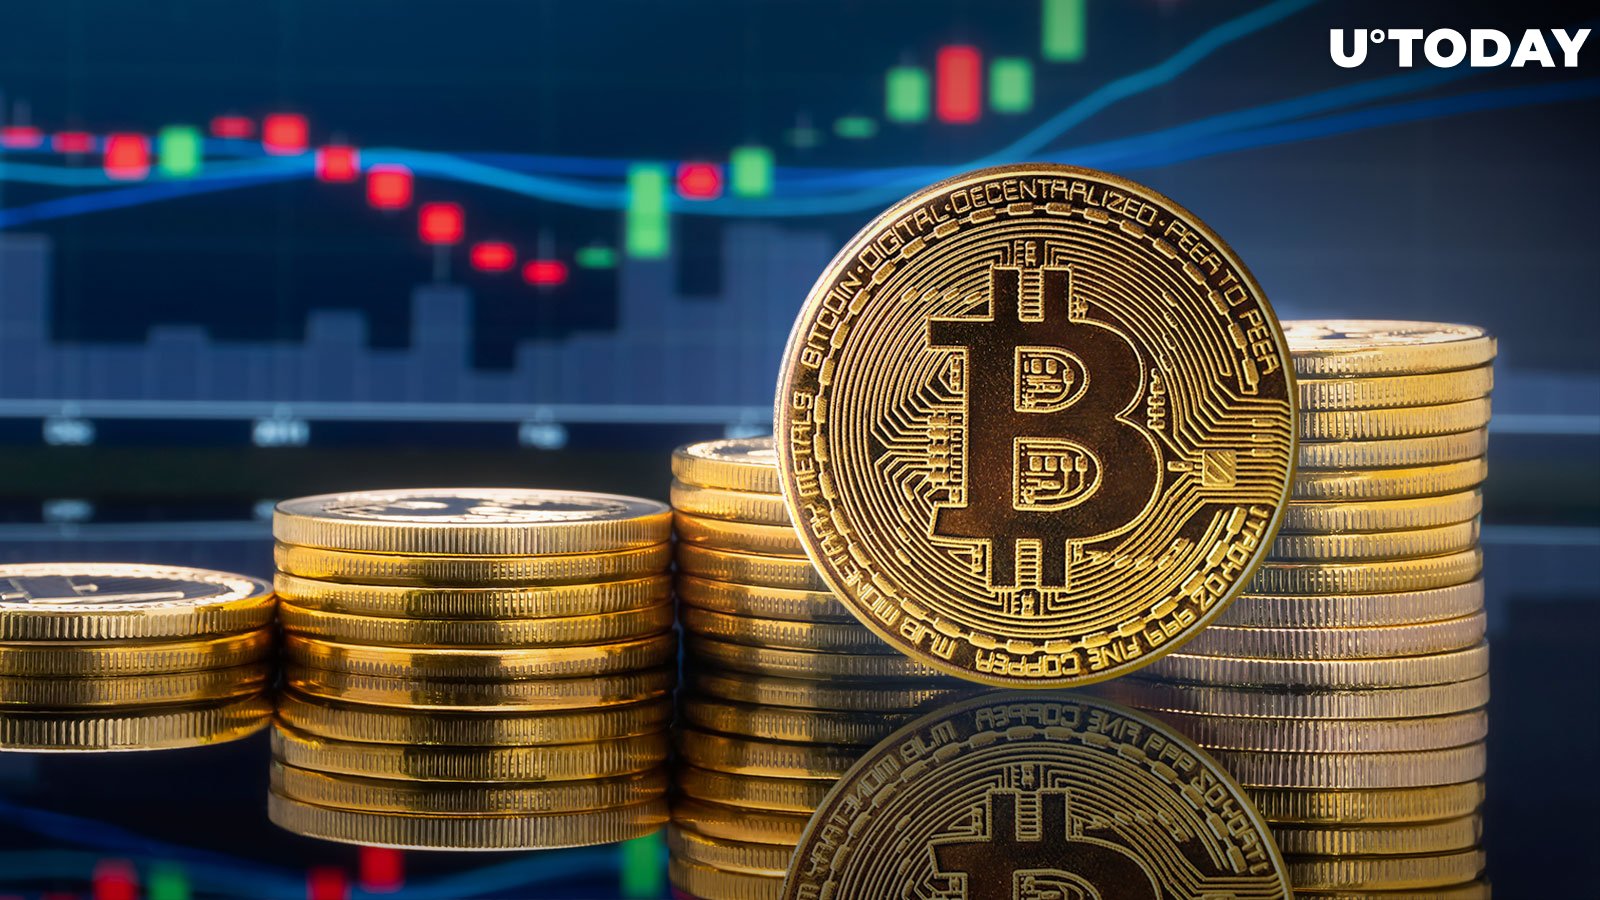 Bitcoin (BTC) to Hit $120,000 as Historic Patterns Repeat, Says Analyst